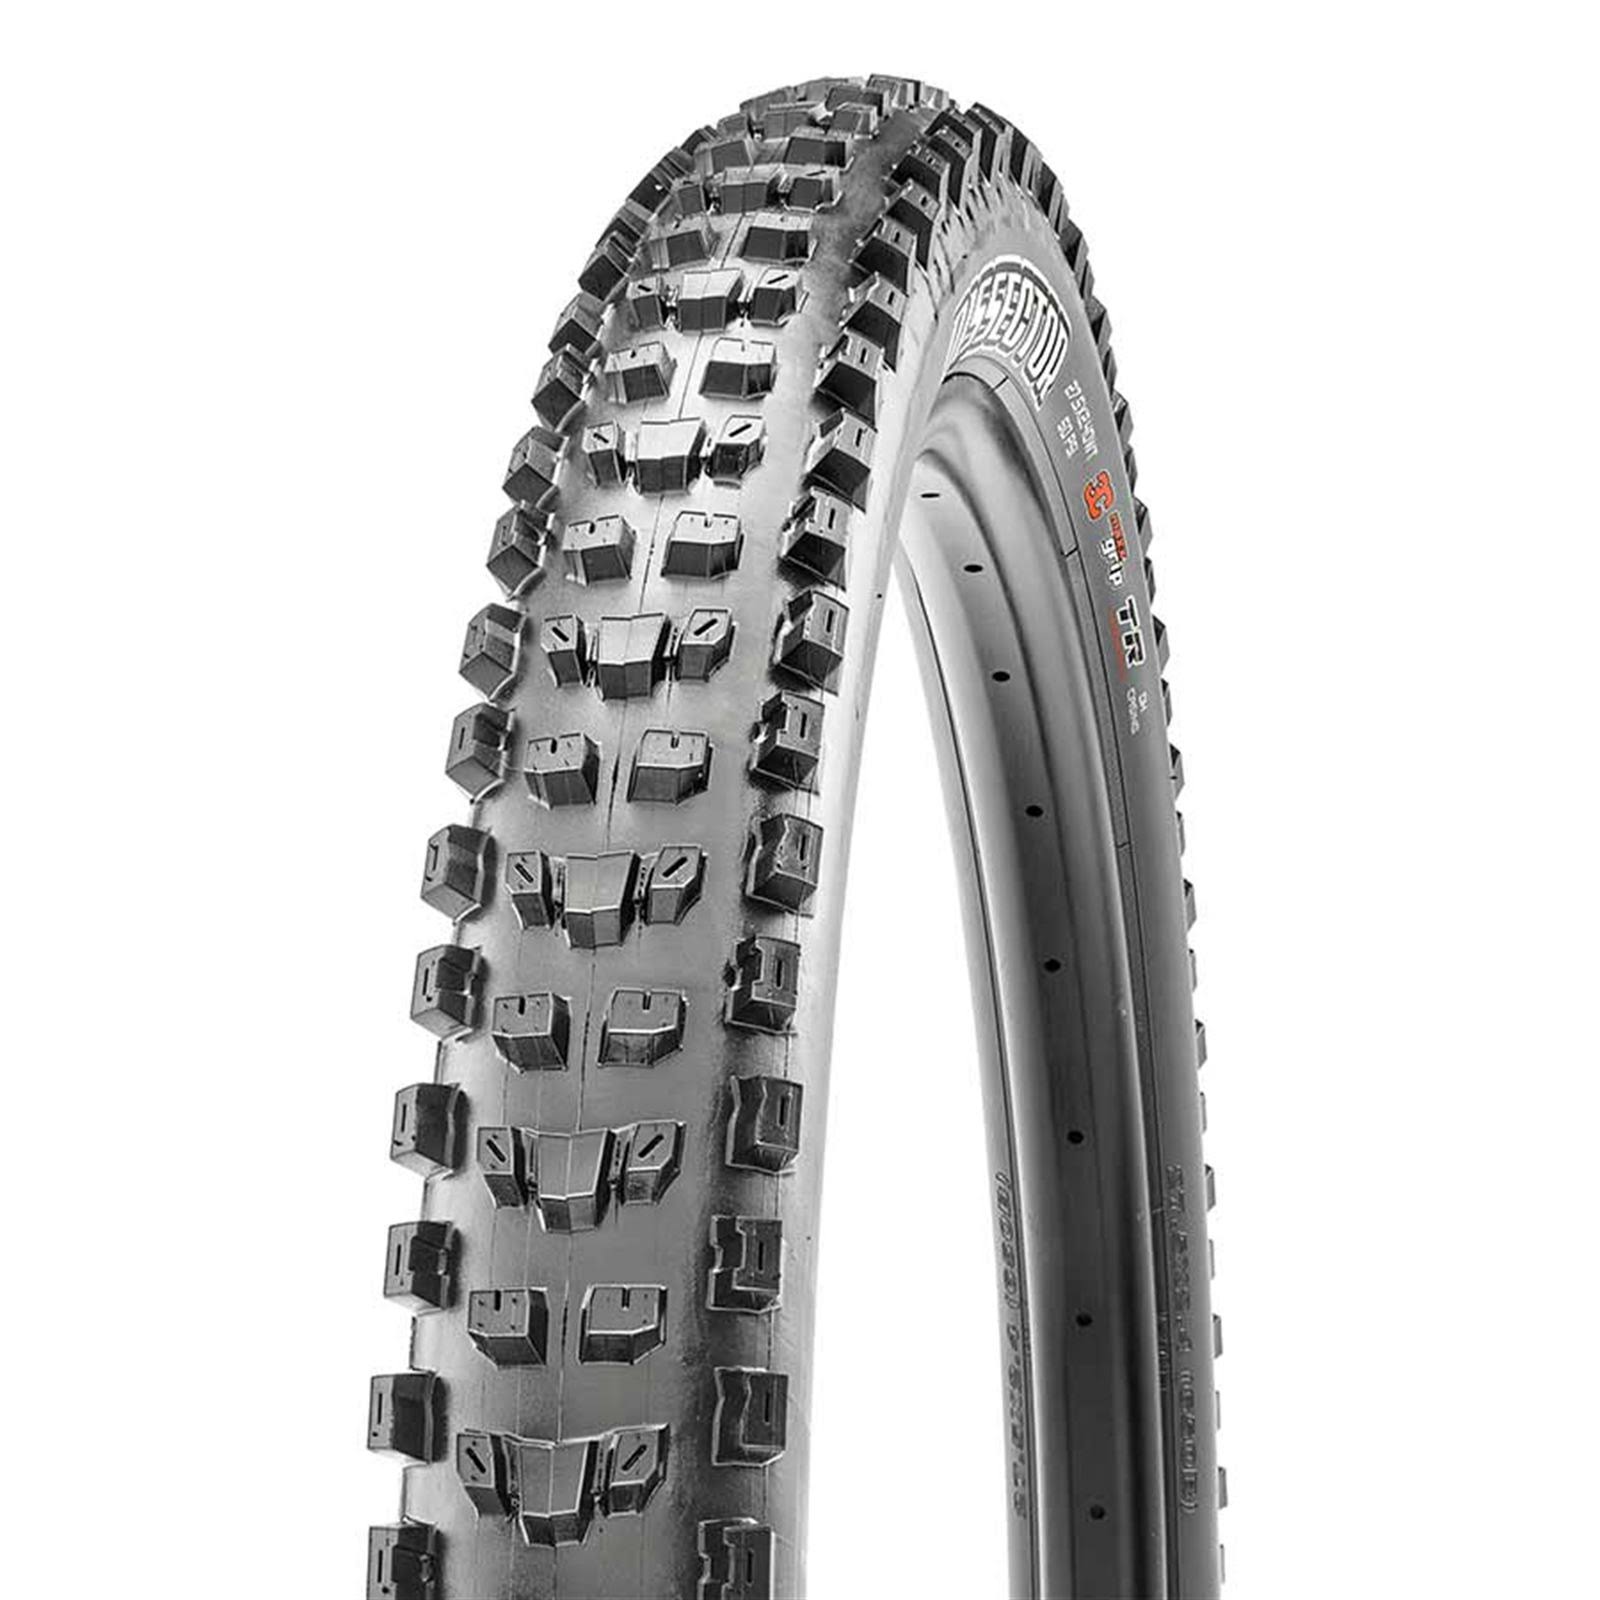 Maxxis Dissector 3C/EXO+/TR 27.5x2.4 Tubeless Tire